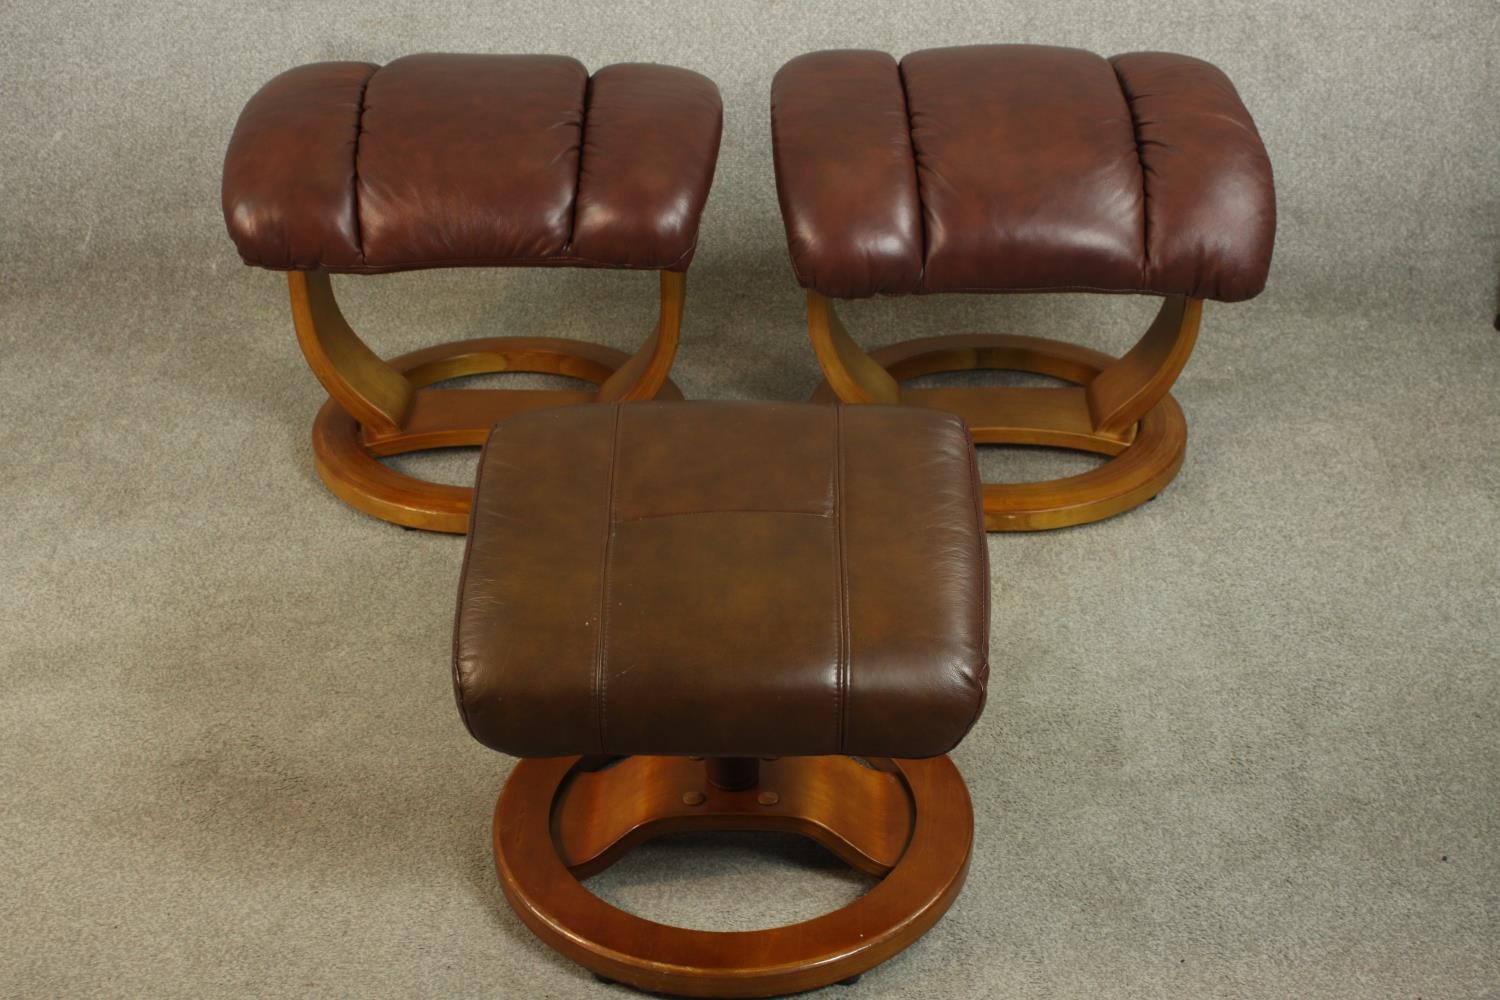 Three late 20th century Stressless style foot stools, inluding a pair upholstered in burgundy